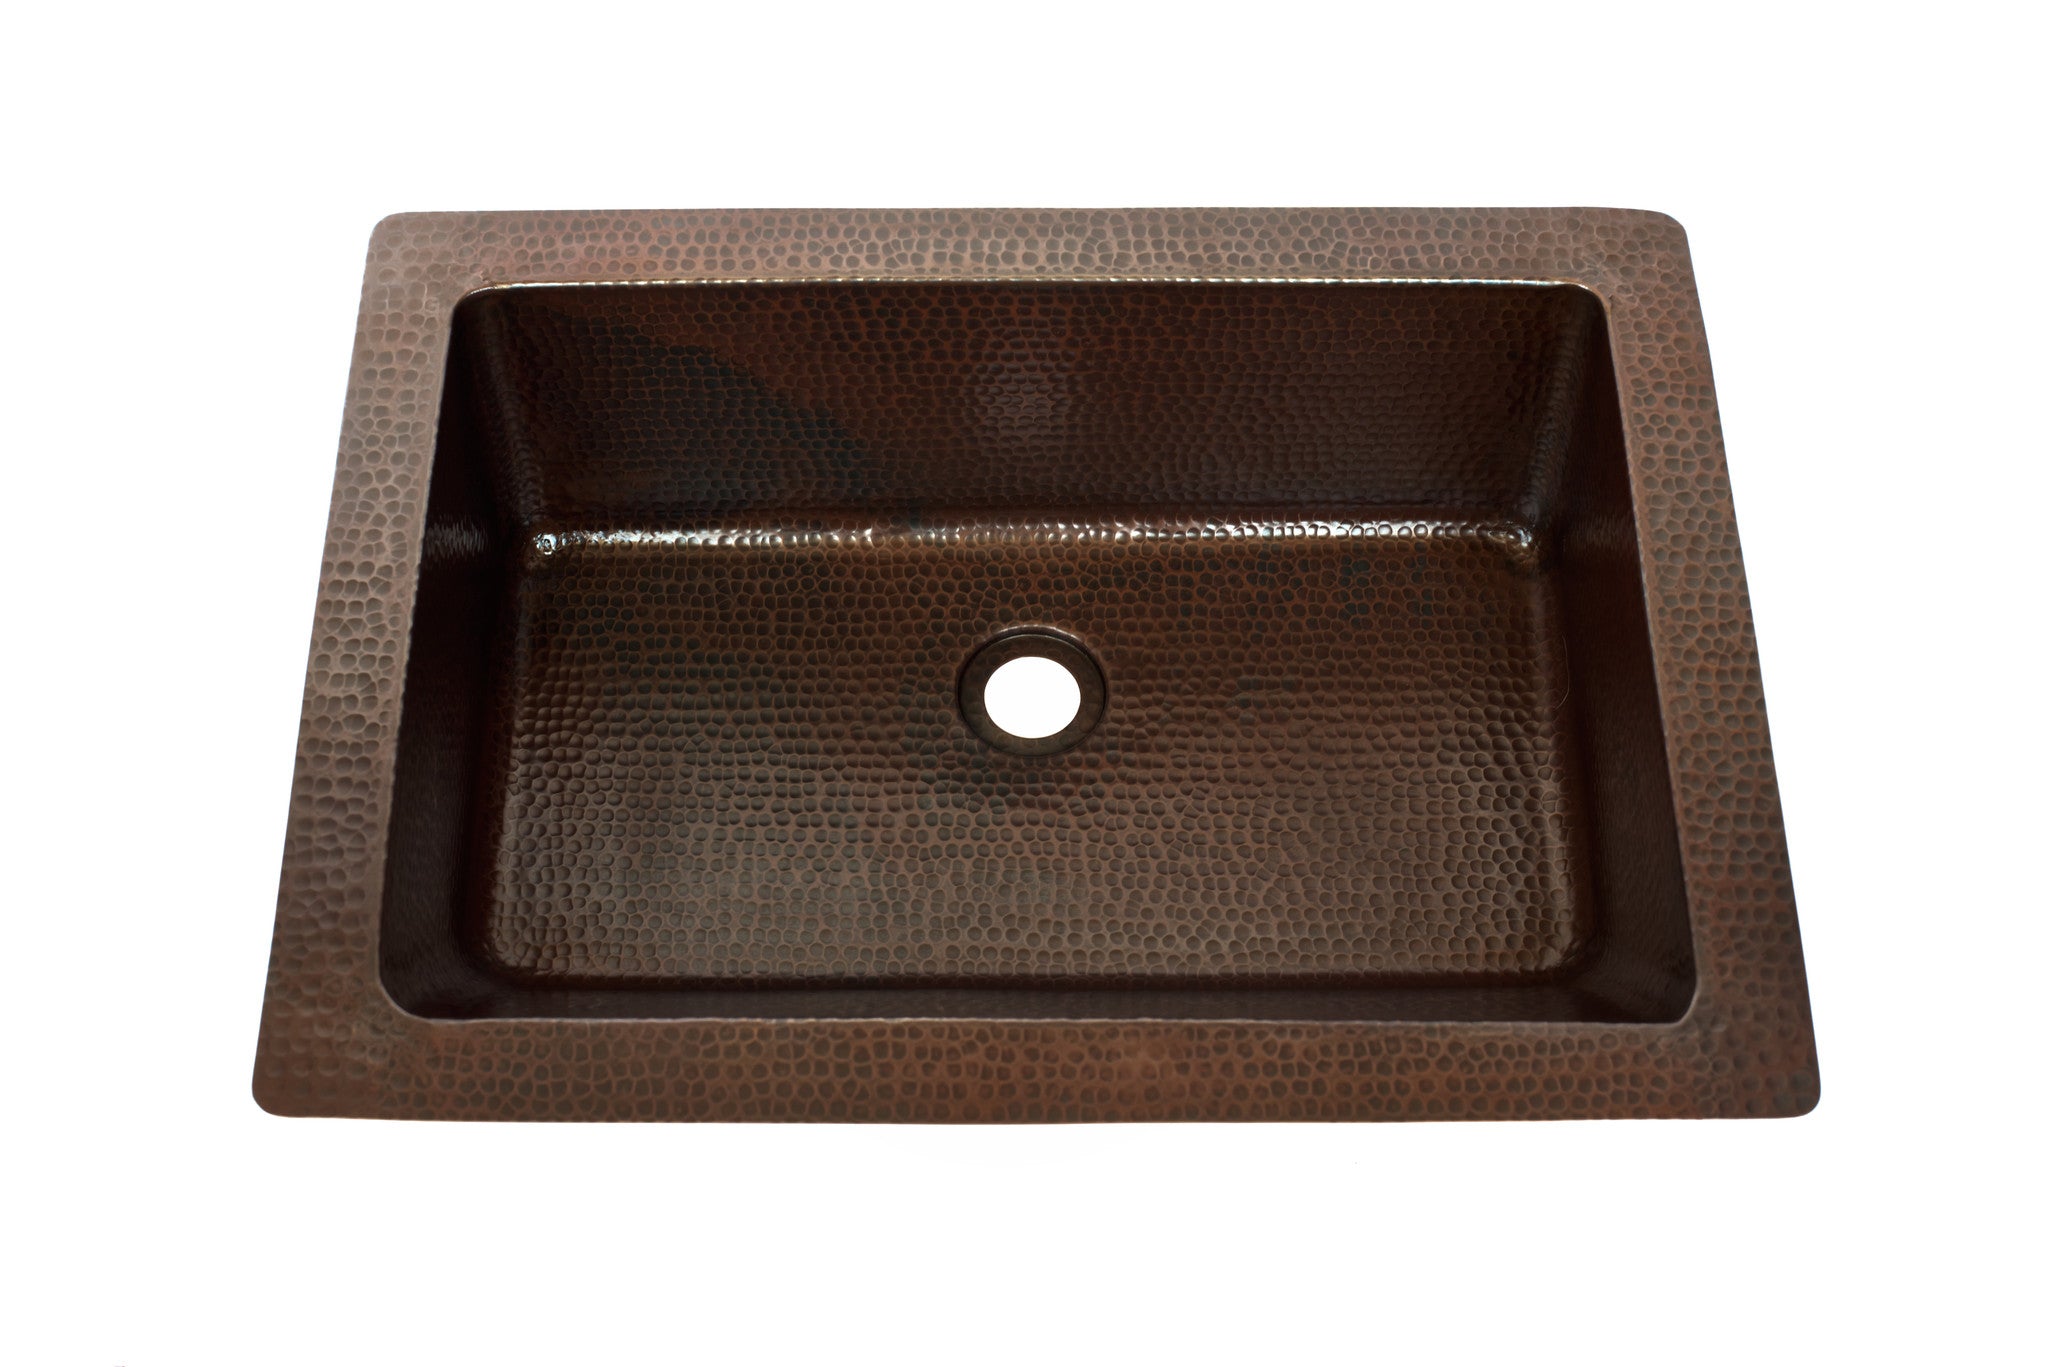 Rectangular Under Mount Bathroom Copper Sink with angled wall